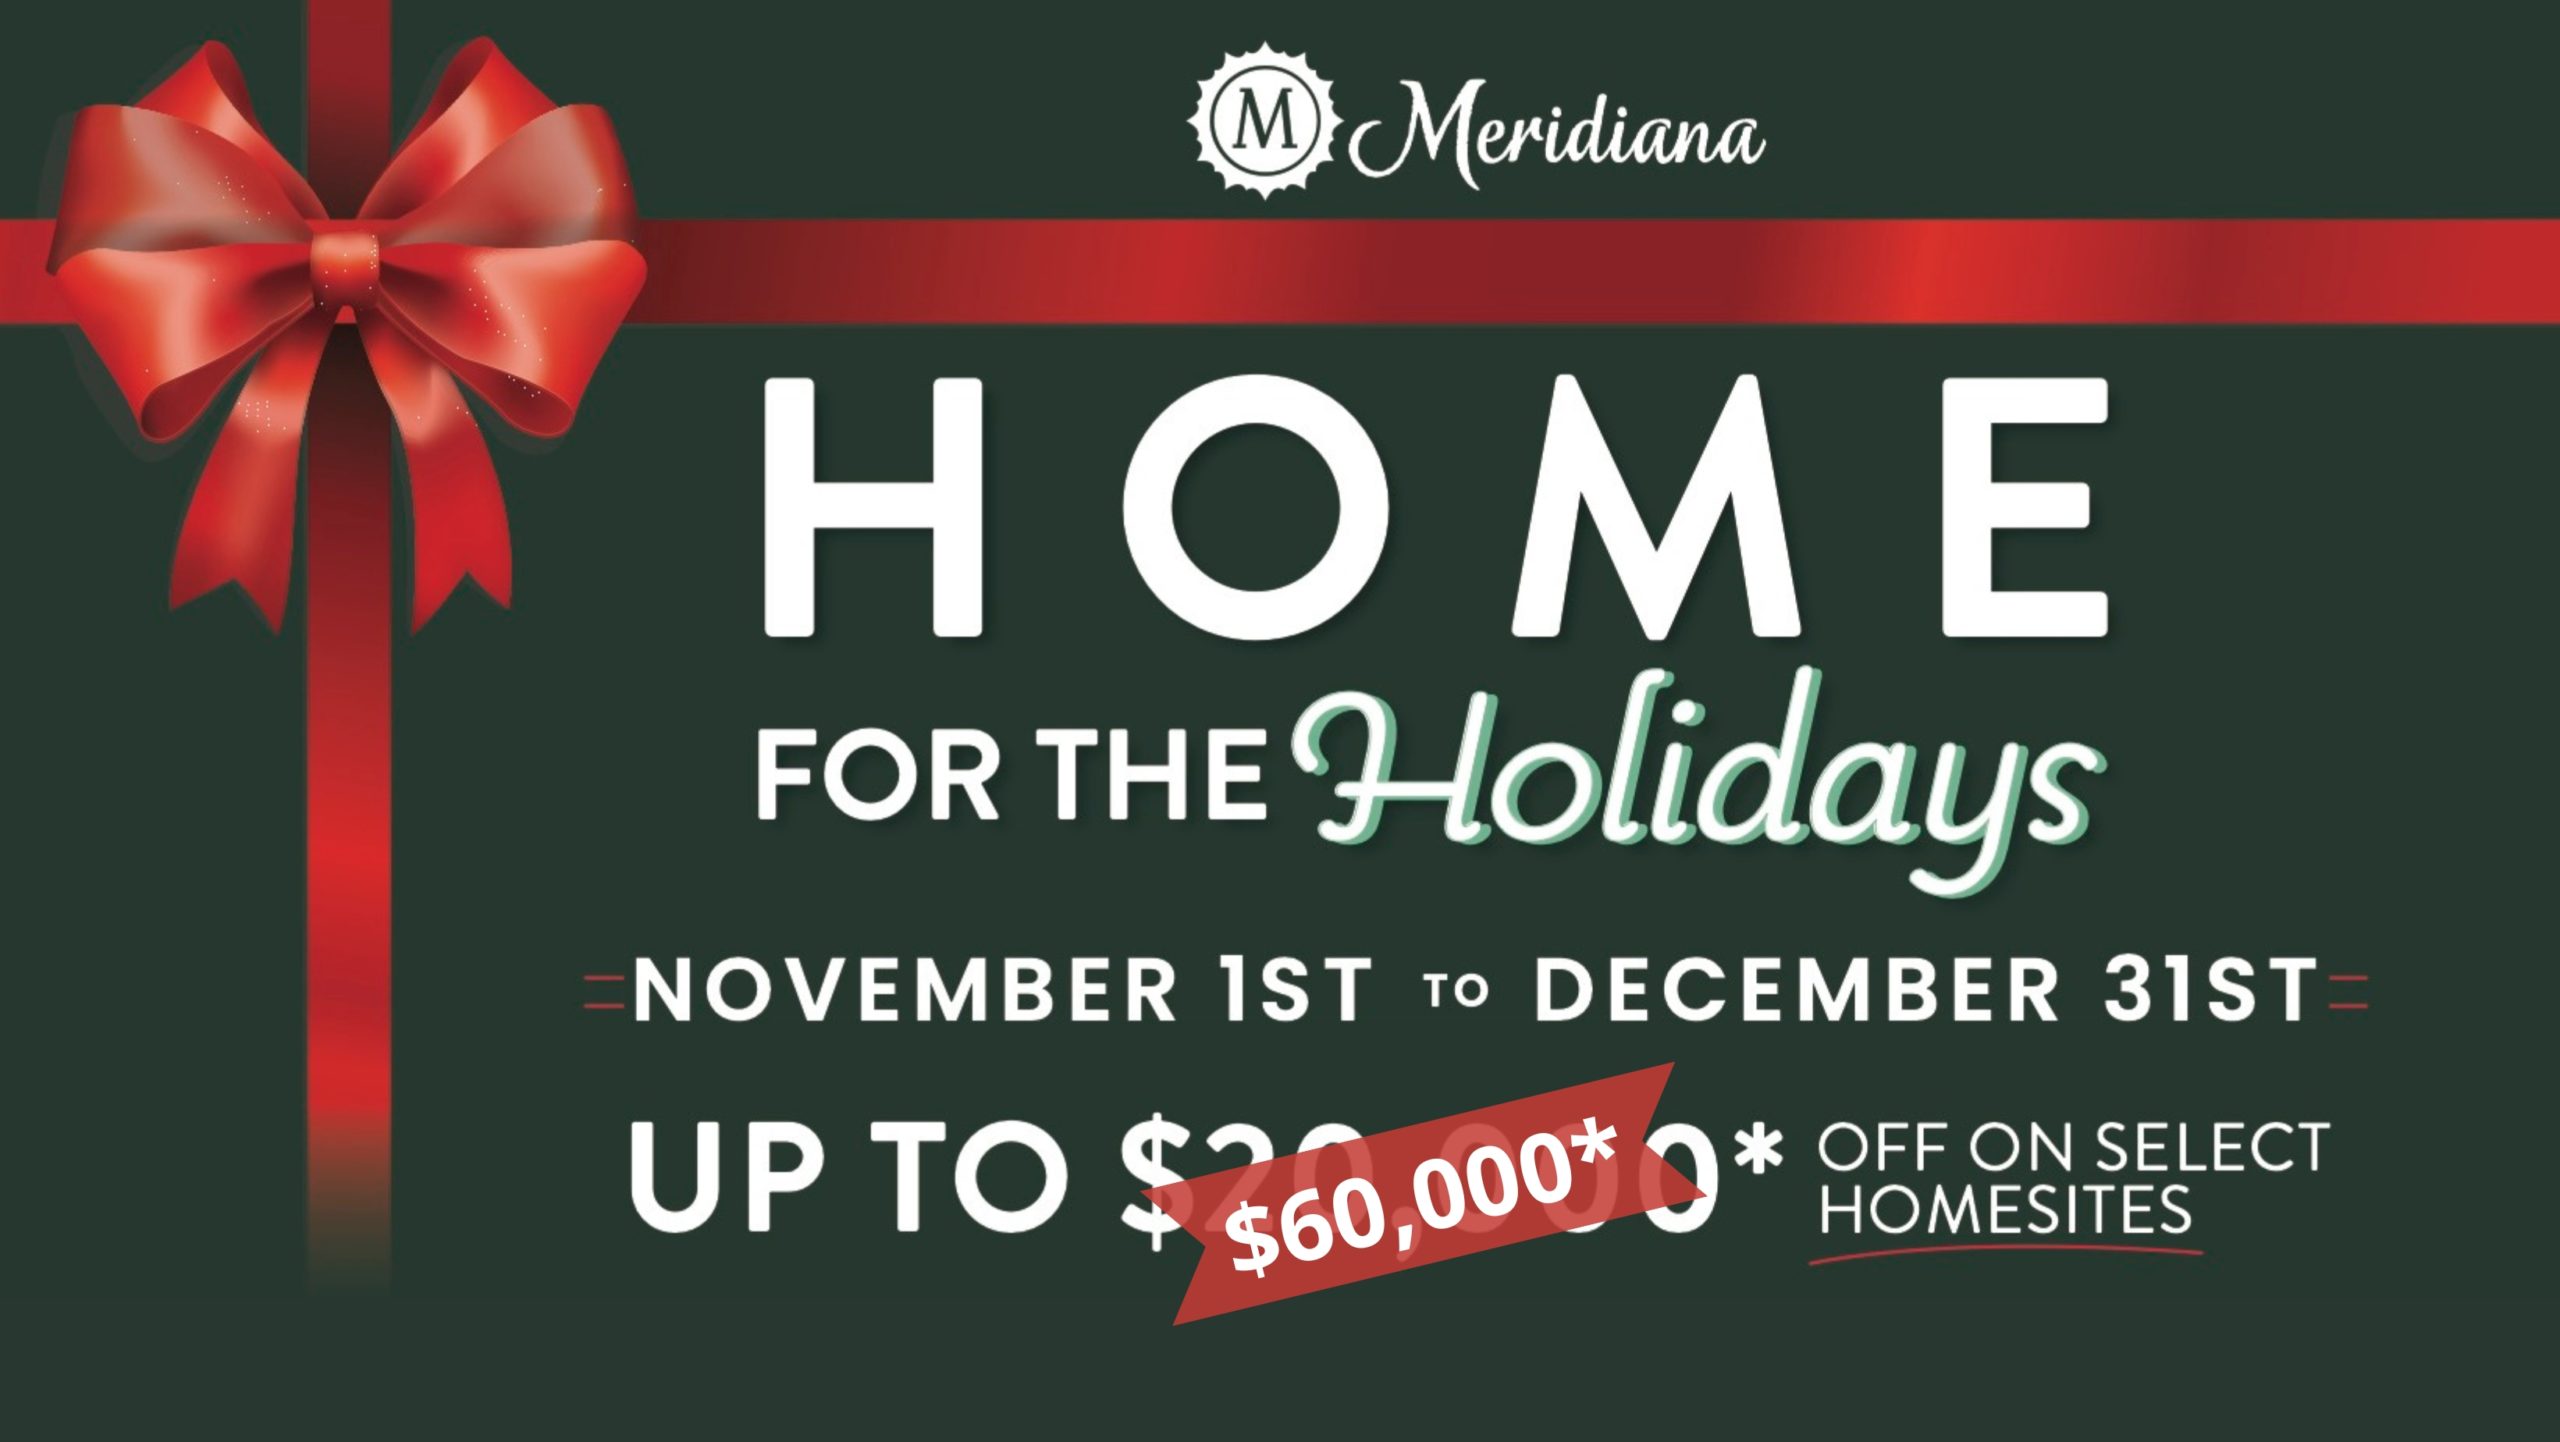 Save Up to $20,000 During Meridiana’s Home for the Holidays’